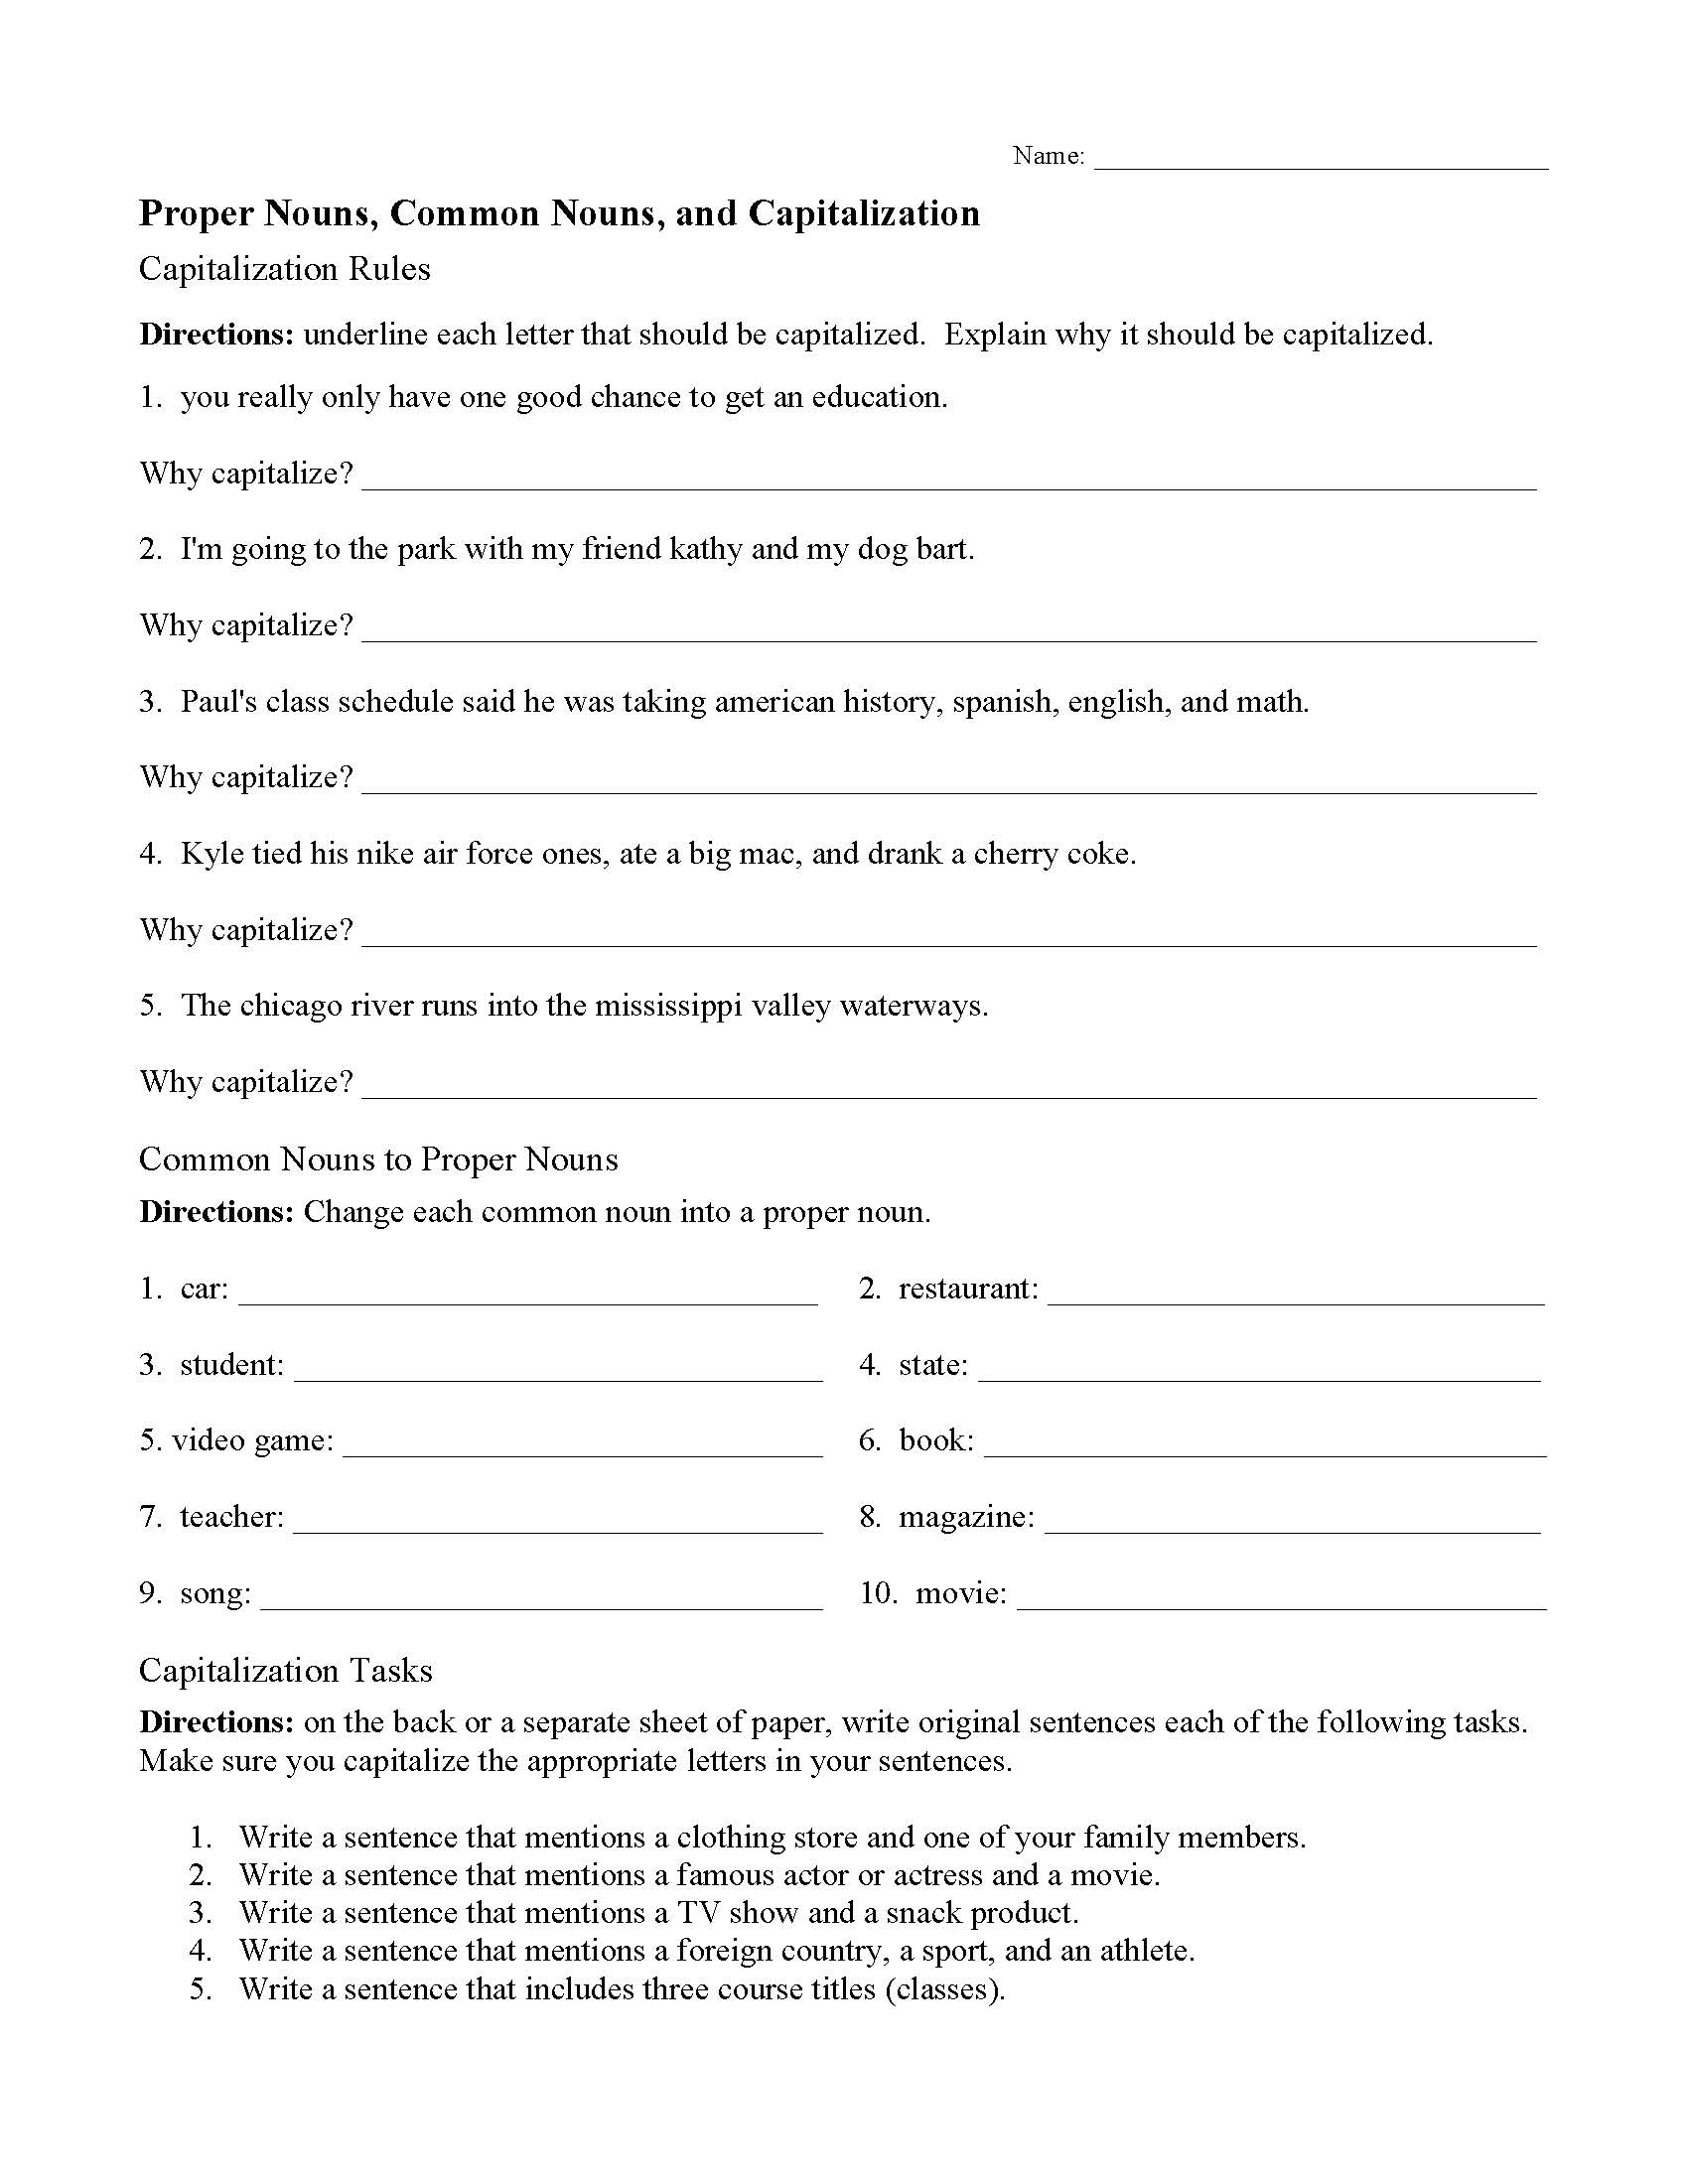 Common And Proper Noun Worksheet For Class 3 A Brief Description Of The Worksheets Is On Each